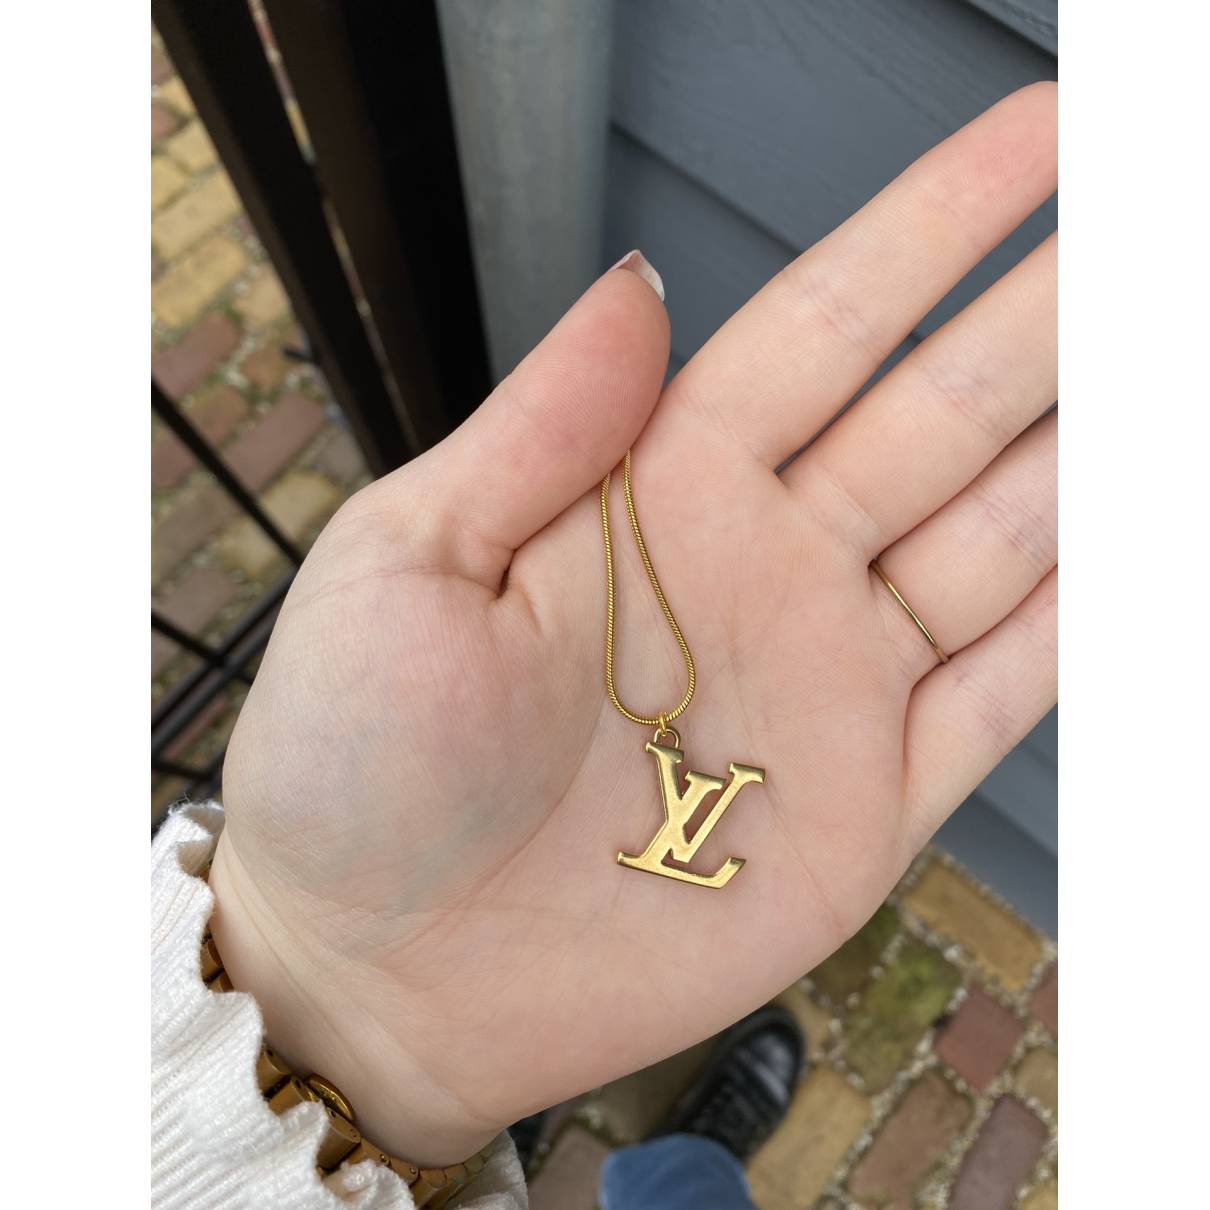 lv necklaces for women